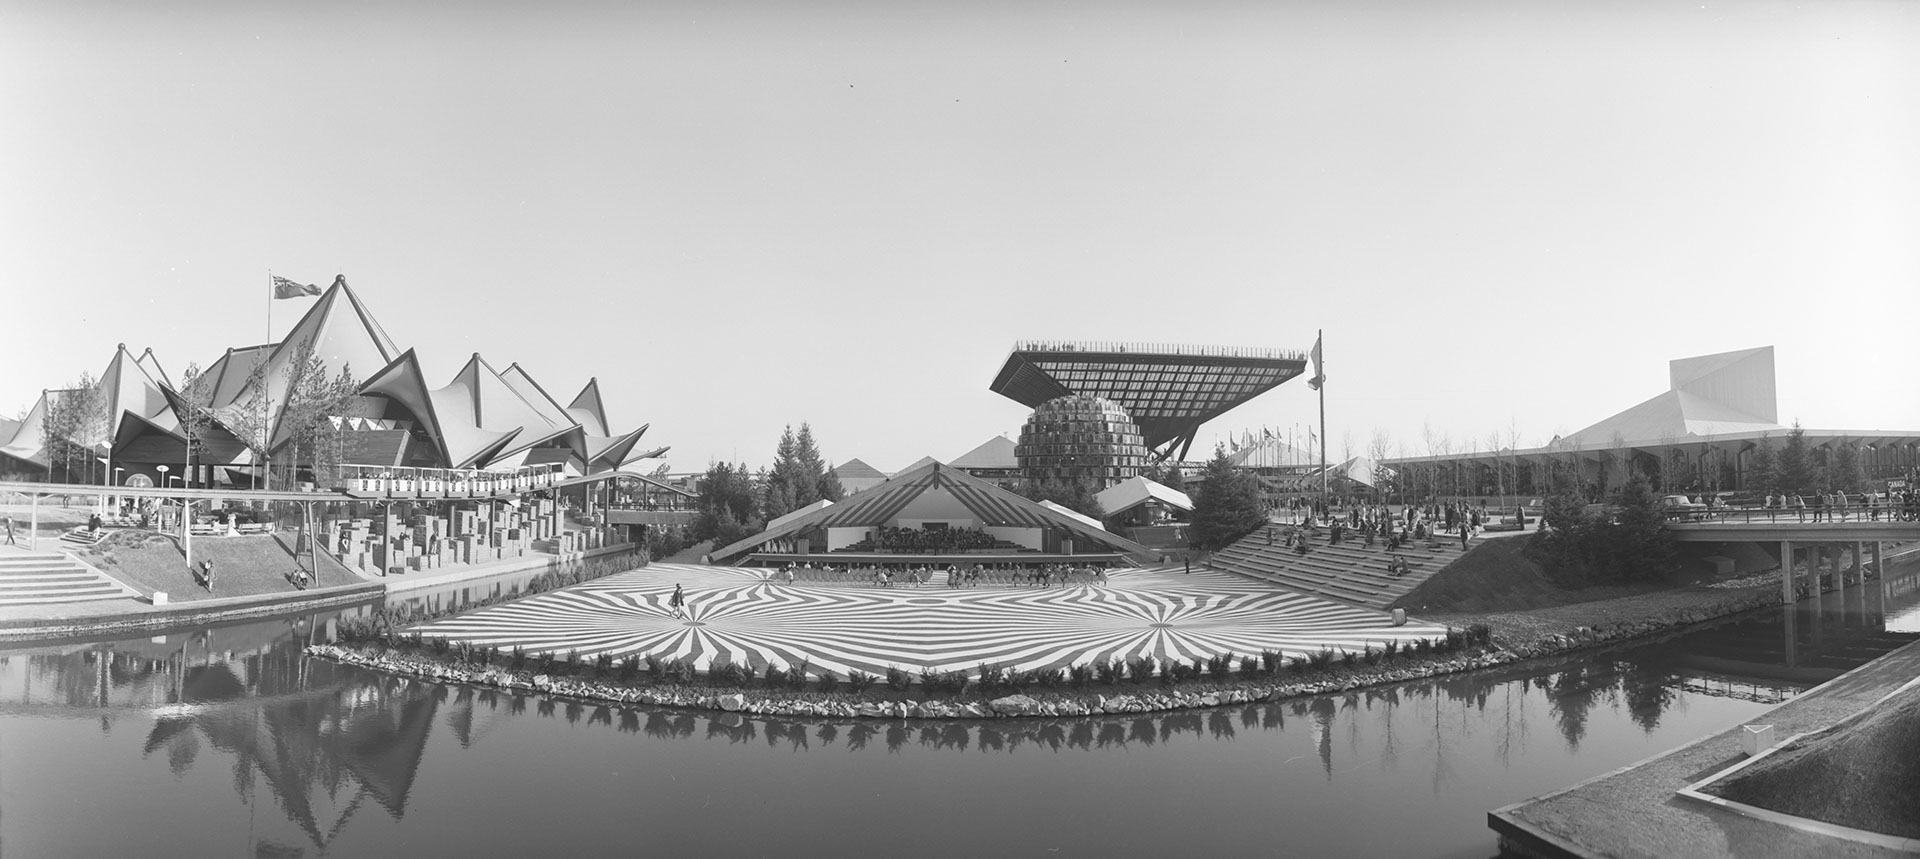 Ontario pavilion and Canadian pavilion at Expo 67